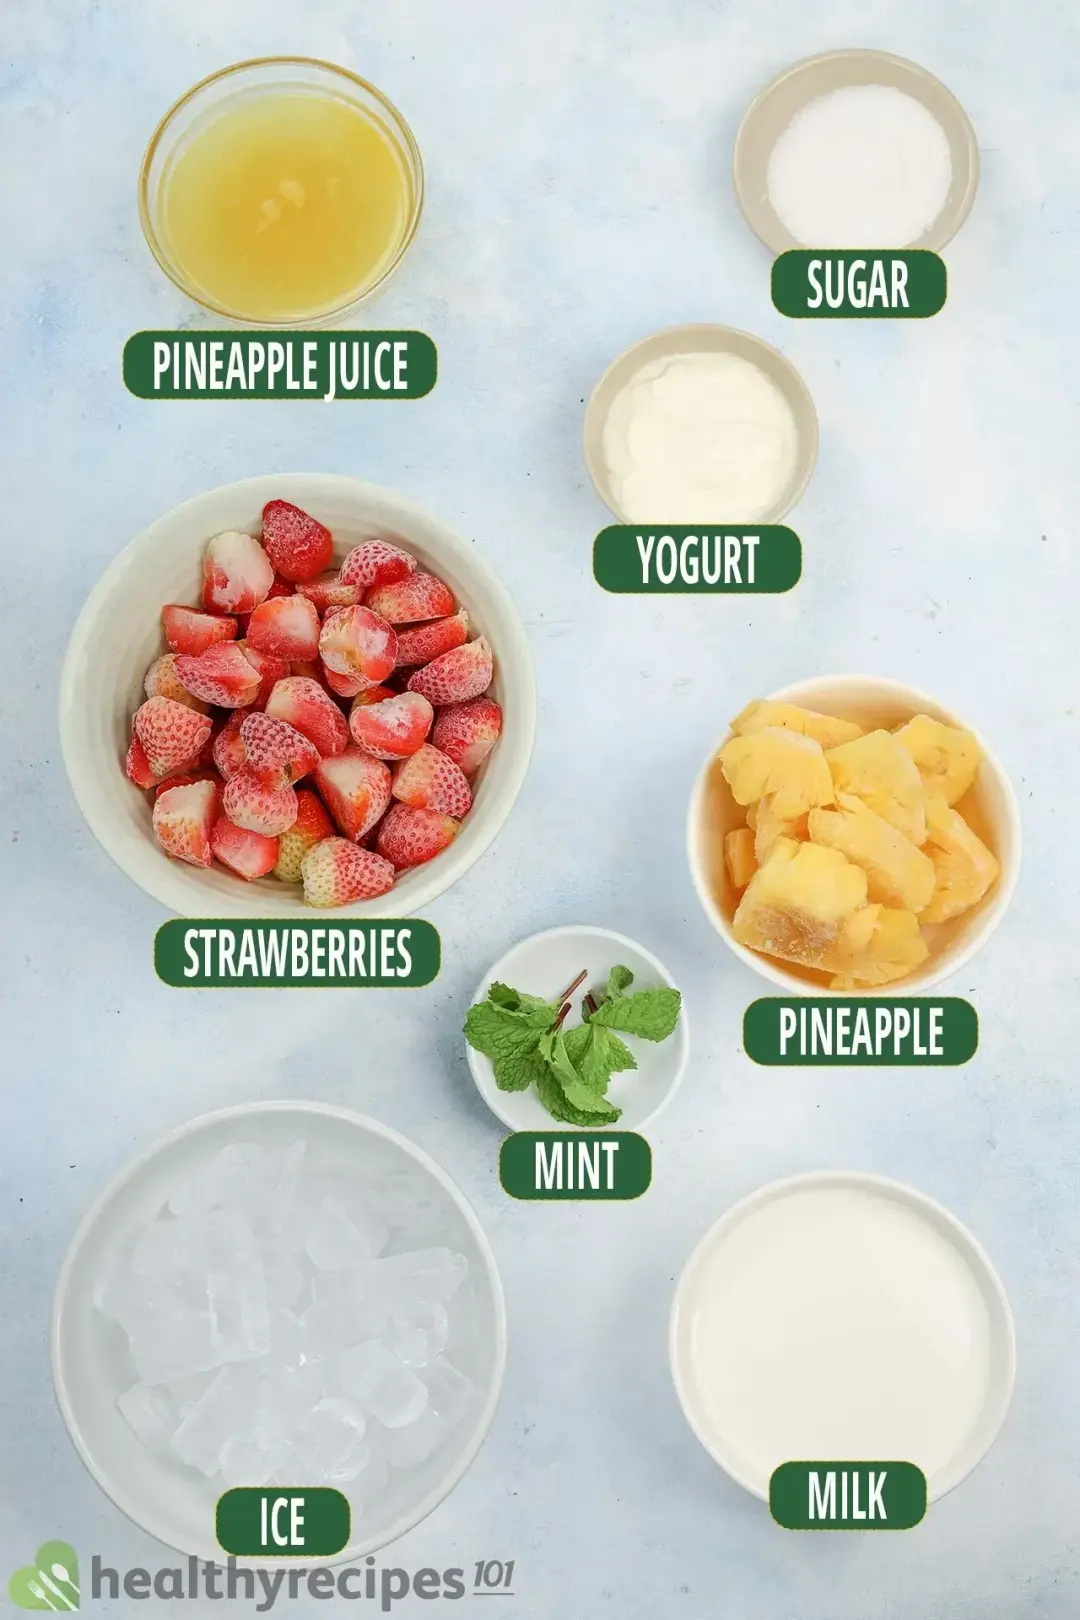 Ingredients for Strawberry Pineapple Smoothie